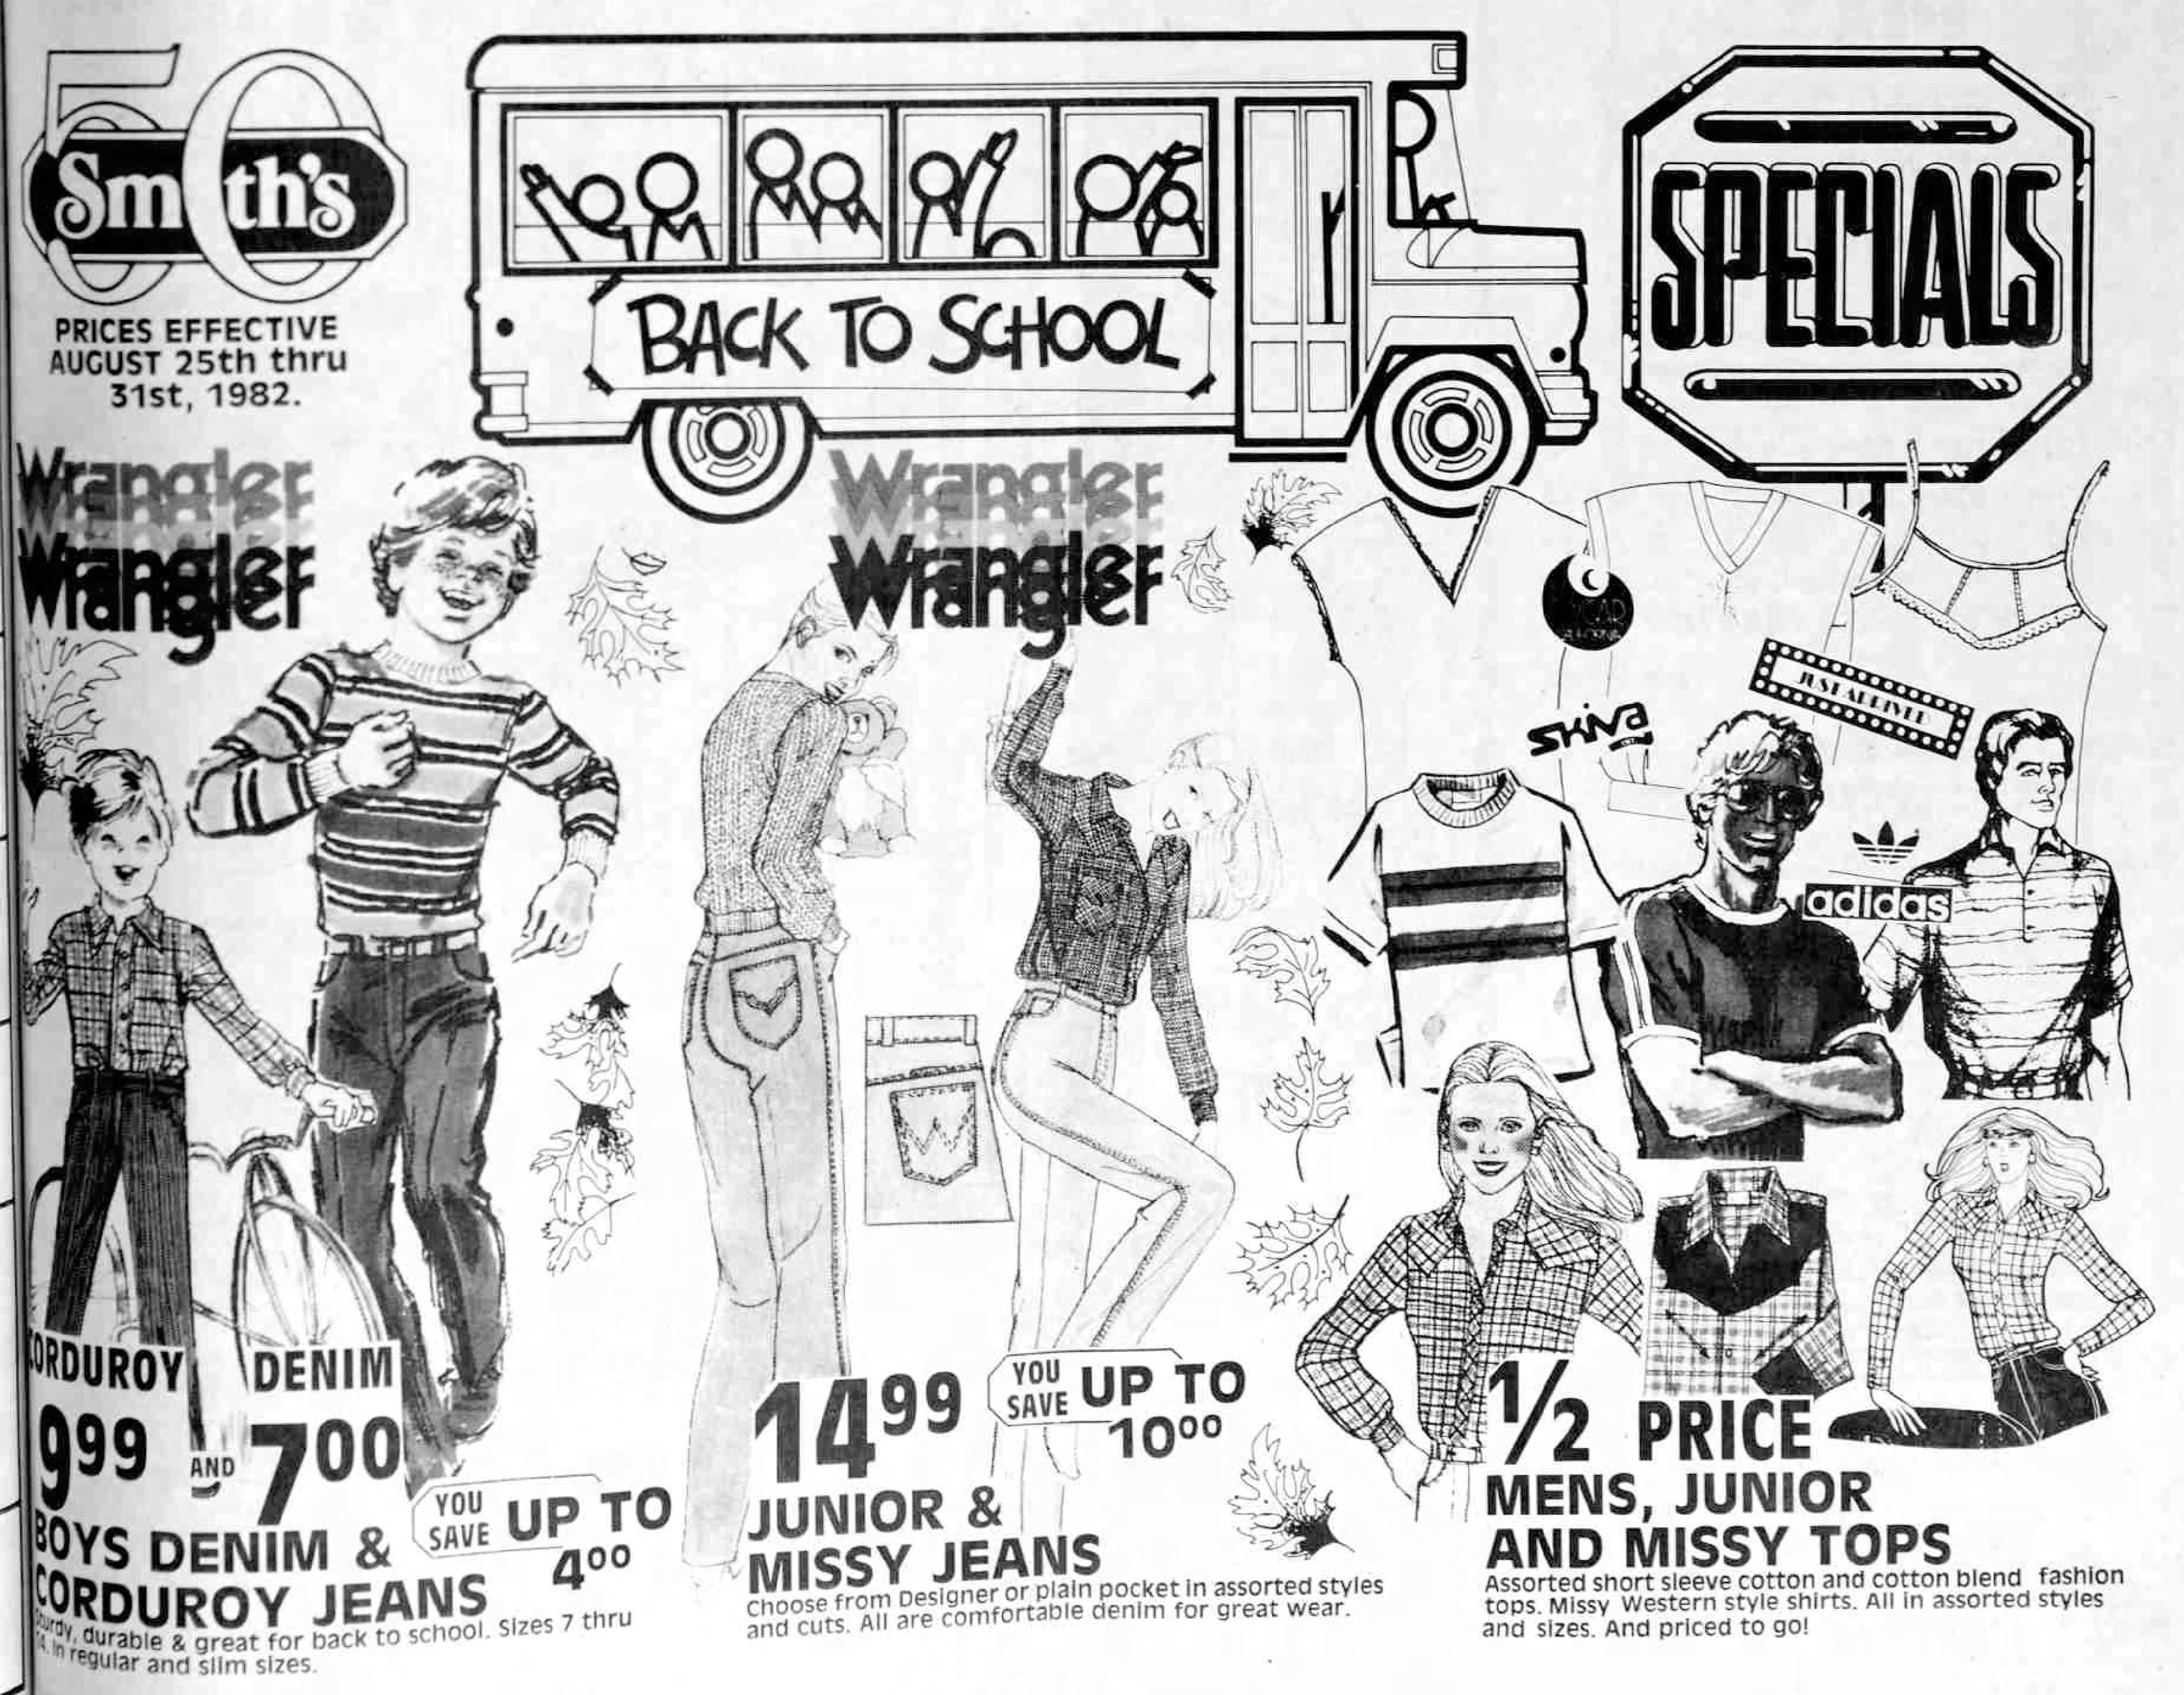 A 1982 ad for back-to-school clothing features jeans & tops.